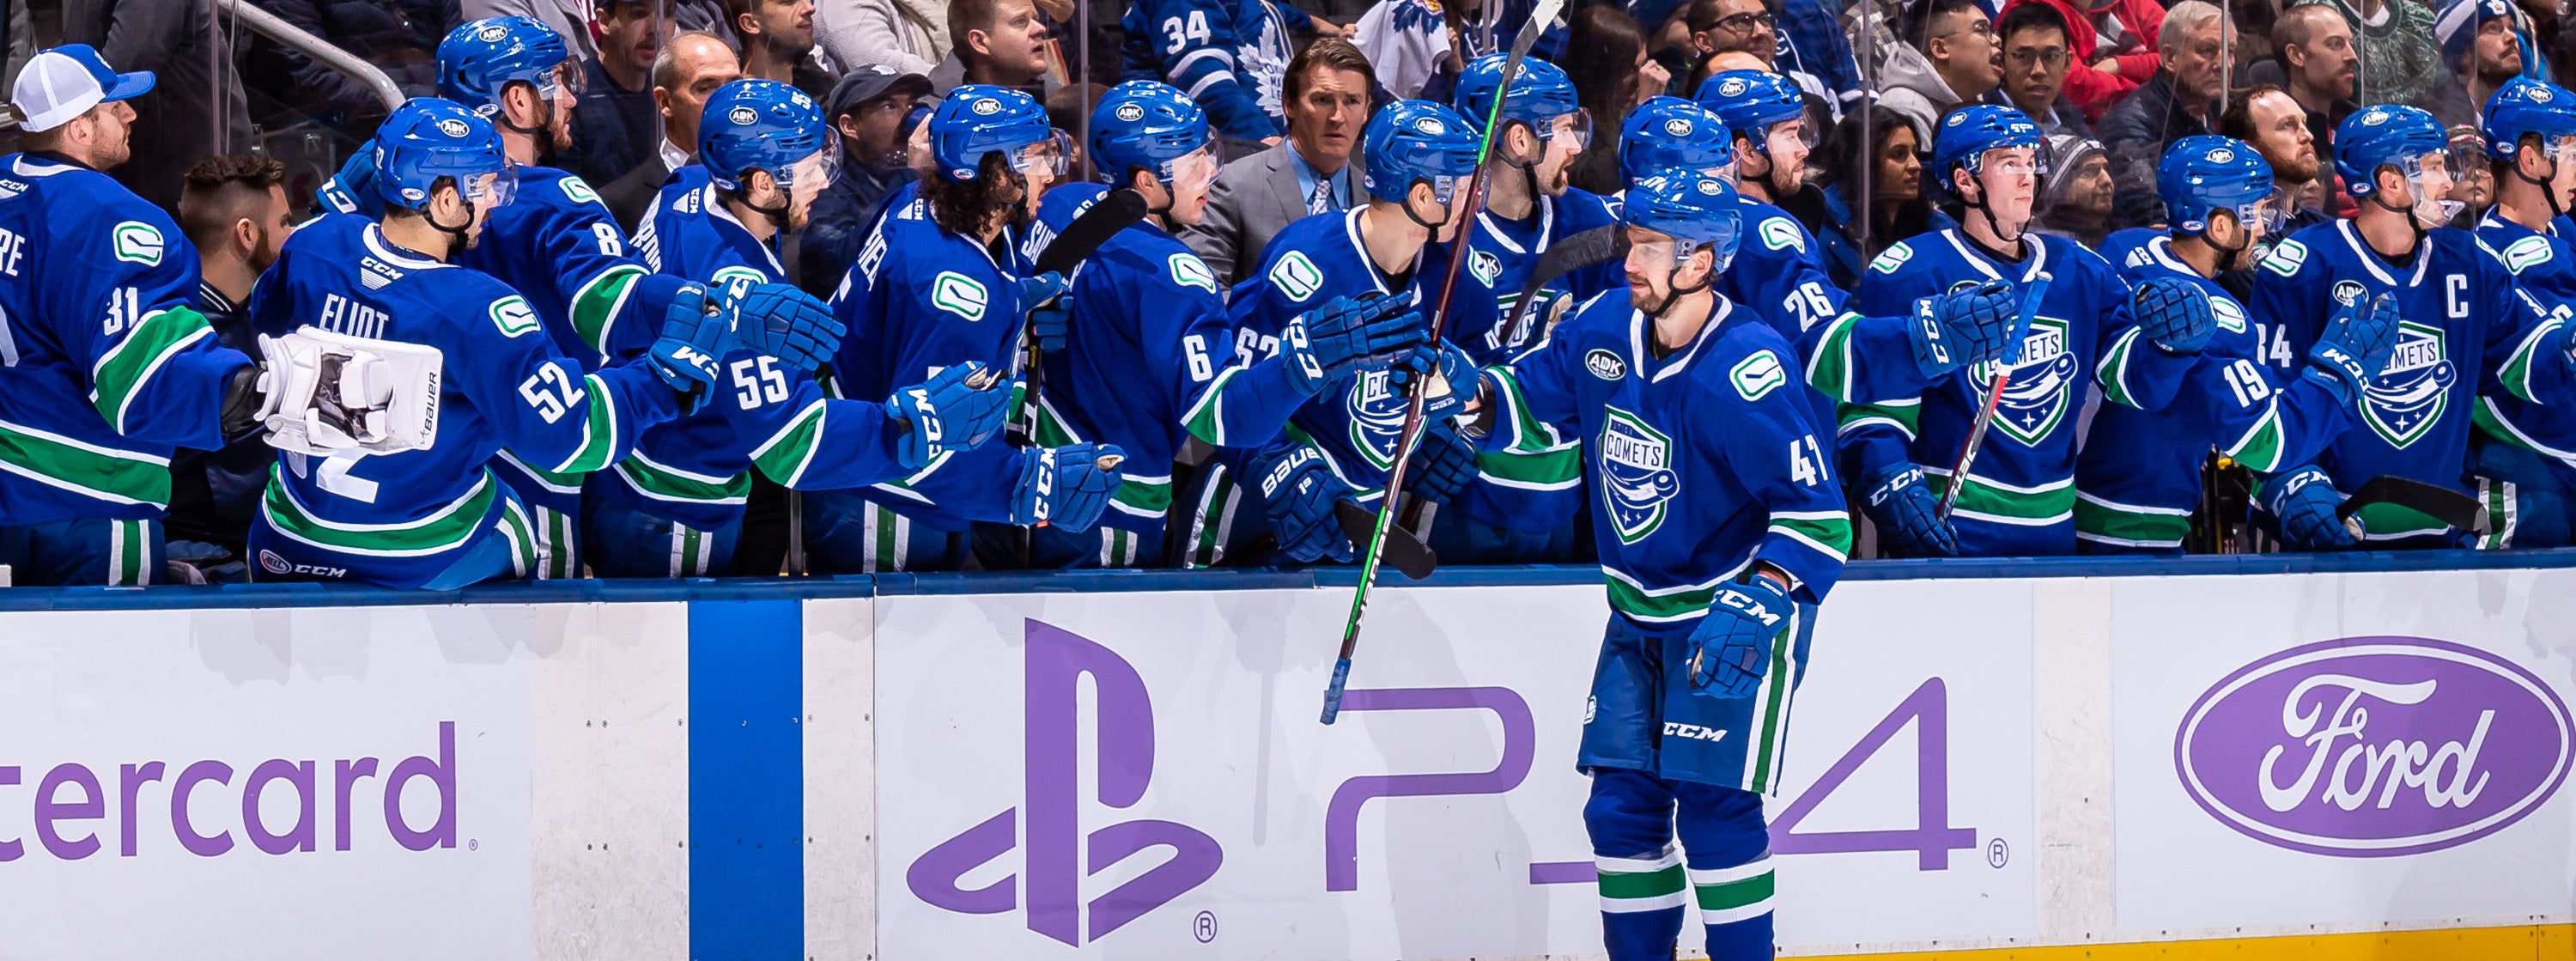 COMETS' TIMELY SCORING DOWNS MARLIES IN TORONTO